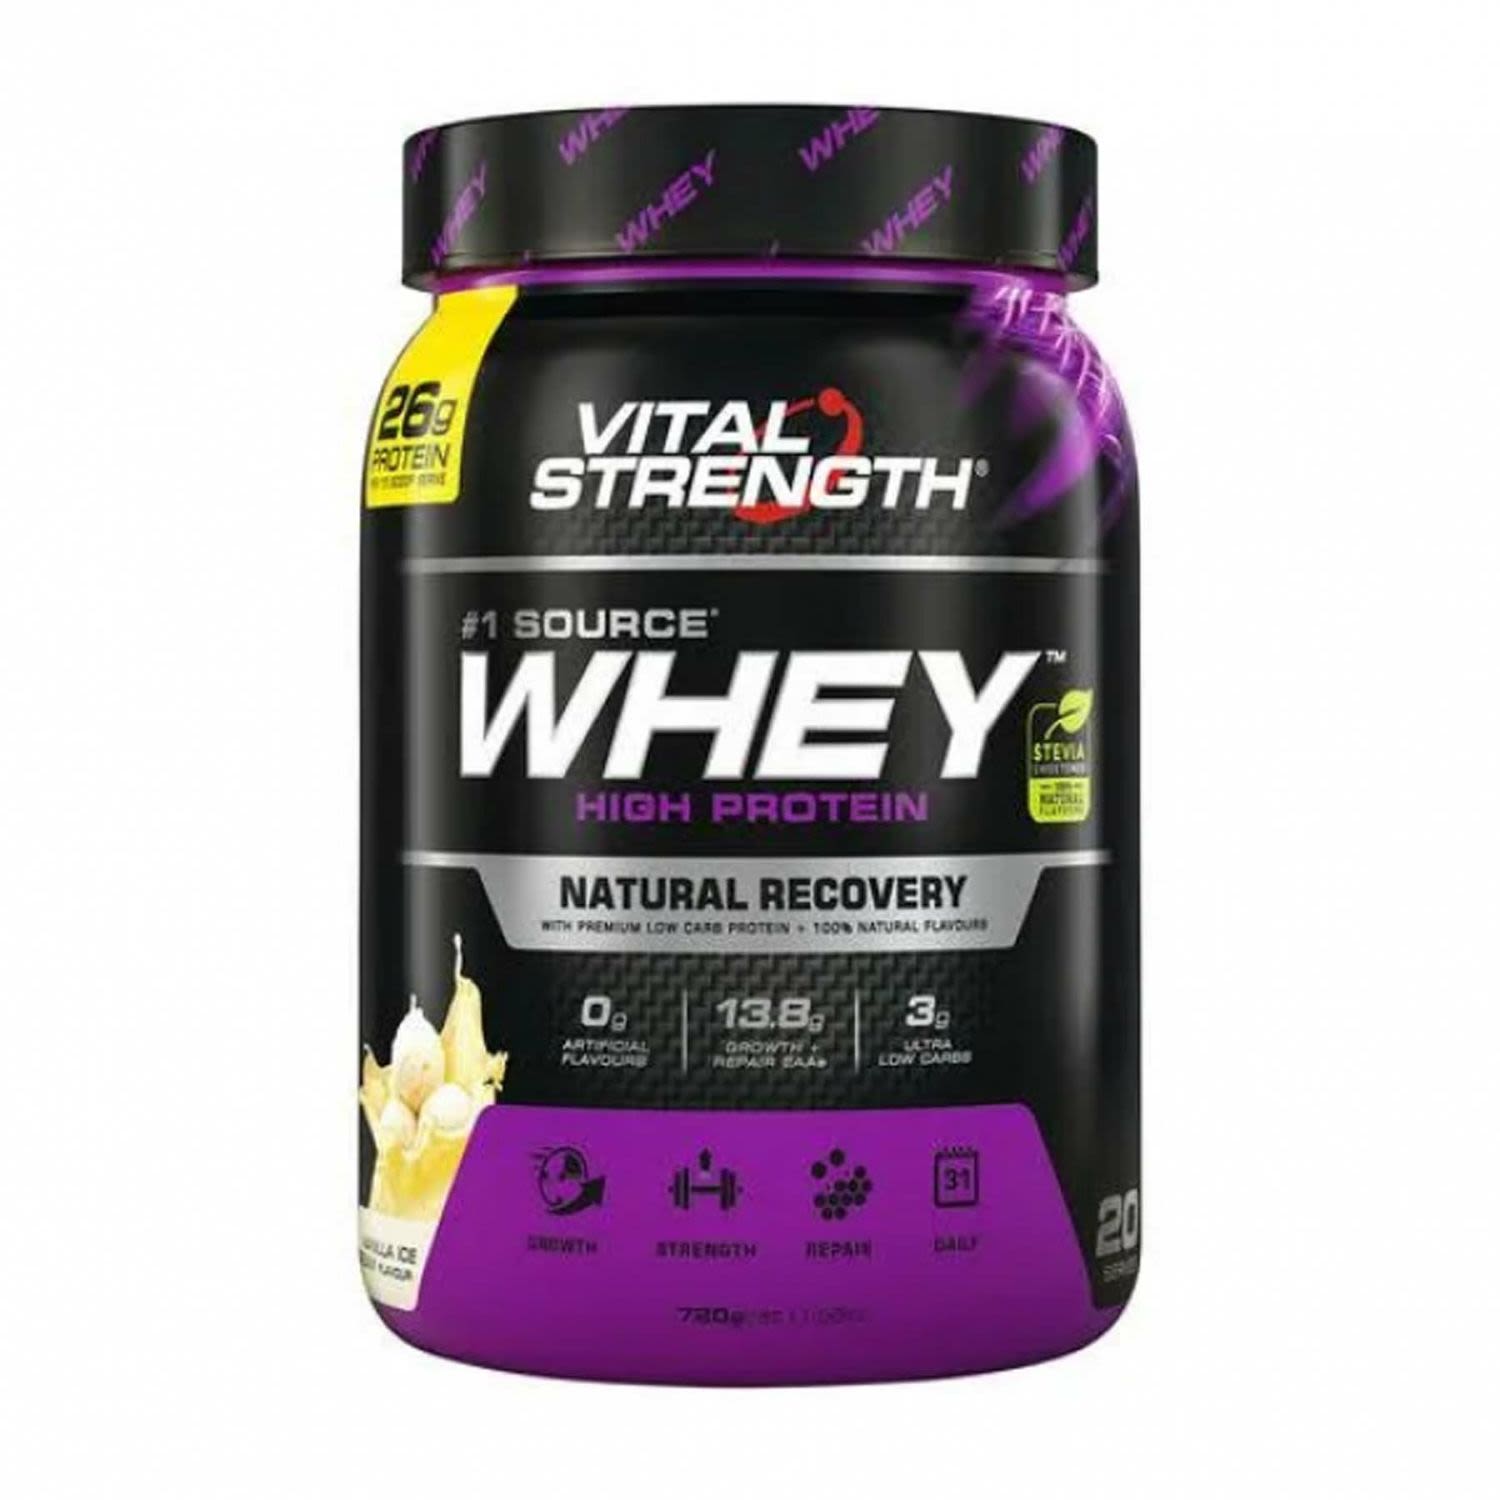 Vital Strength Whey Low Carb High Protein Vanilla, 720 Gram